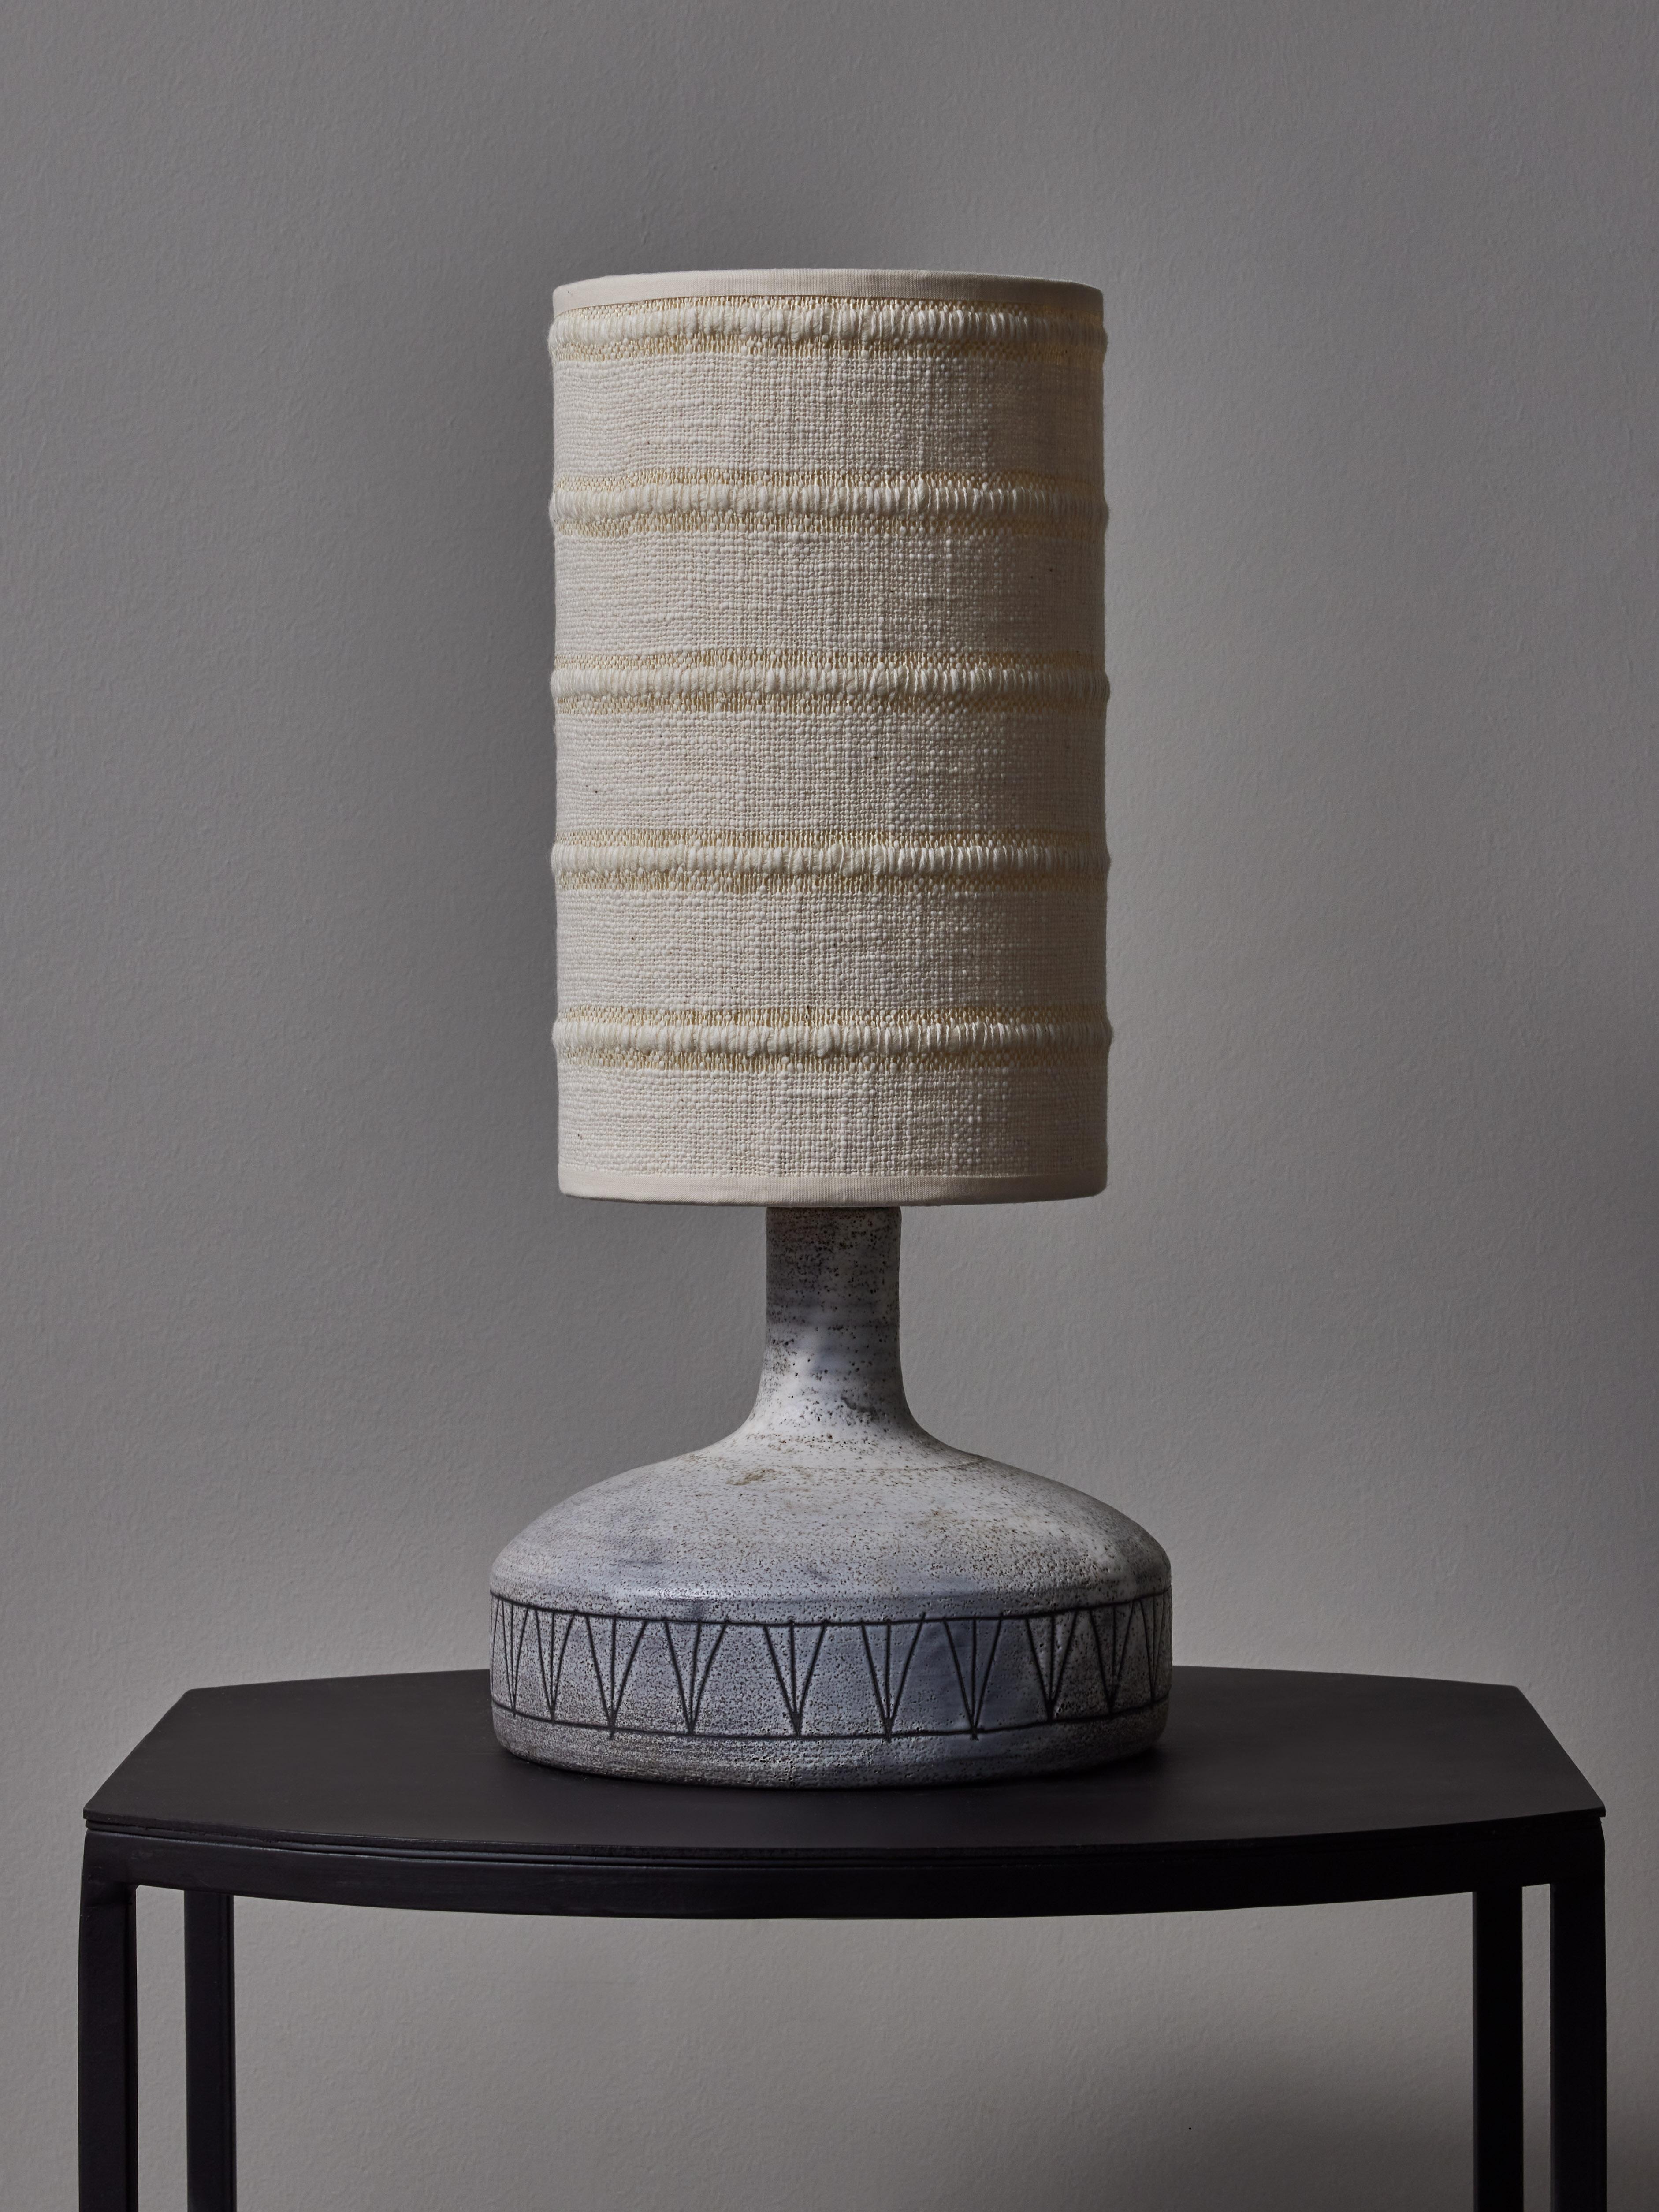 Small ceramic table lamp with a mat light grey glaze and scared decors by Jacques Pouchain signed at the bottom L’Atelier Dieulefit. Topped with a shade with Dedar Milano fabric.


Jacques Pouchain (1927-2015)
Painter, sculptor and ceramist, best